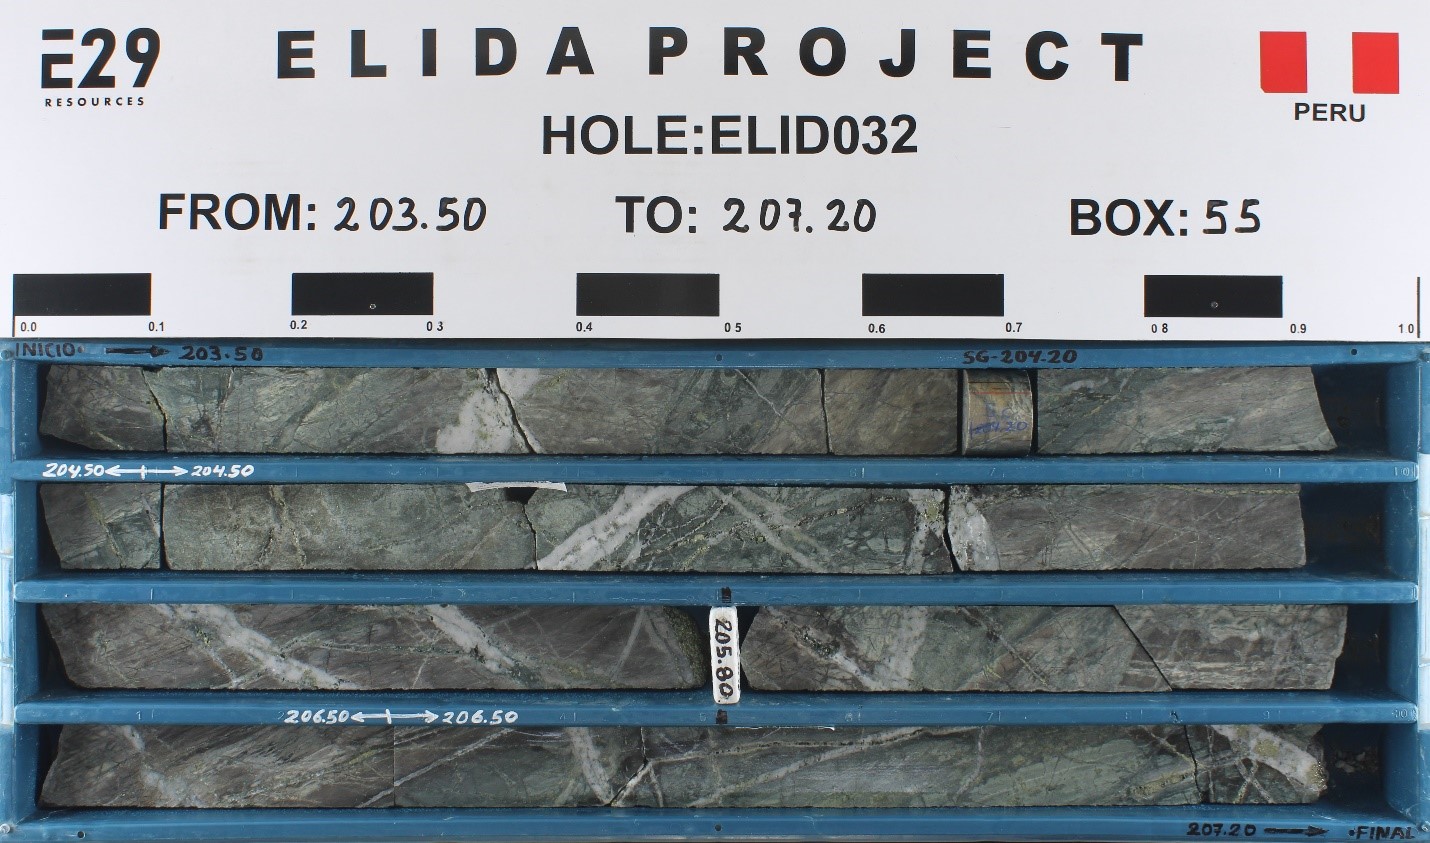 An example of porphyry style mineralization from hole ELID032. Strong, multiphase veinlets are developed in feldspathic sandstone host rock. Multiple generations of quartz and sulphide veinlets are visible. Hydrothermal potassium feldspar and biotite reveal a potassic environment of formation. Samples pertaining to core in this box are: 202.5-204.5 m, 0.85% Cu, 0.022% Mo, 6.0 g/t Ag; 204.5-206.5 m, 0.89% Cu, 0.029% Mo, 6.3 g/t Ag; 206.5-208.5 m, 0.85% Cu, 0.047% Mo, 5.8% Ag. Core is HQ diameter (63.5 mm).